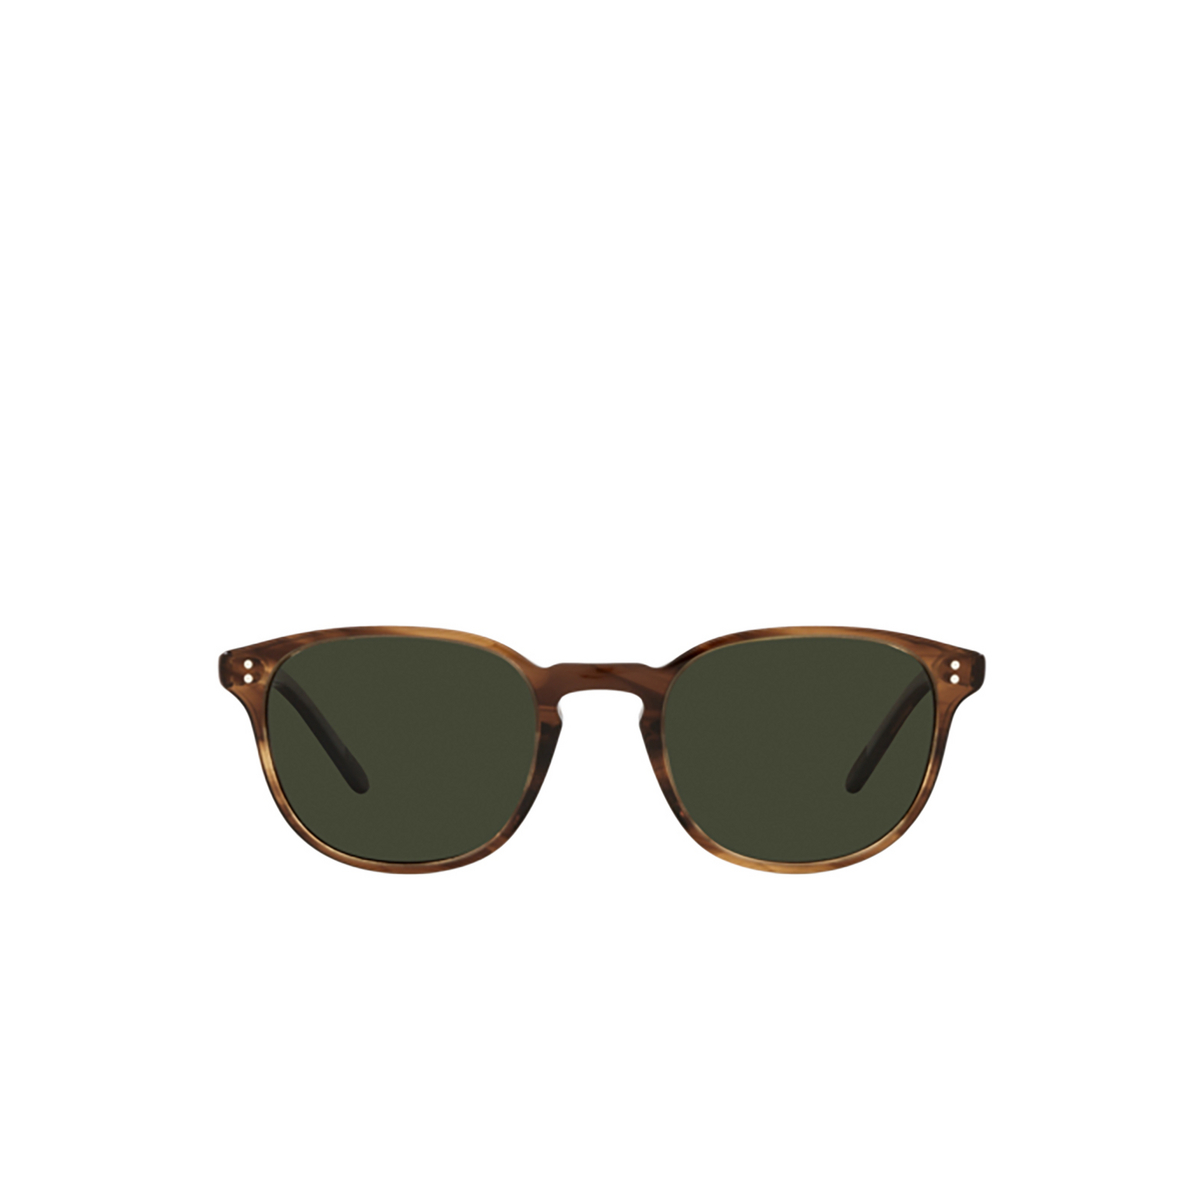 Oliver Peoples FAIRMONT Sunglasses 1724P1 Tuscany Tortoise - front view